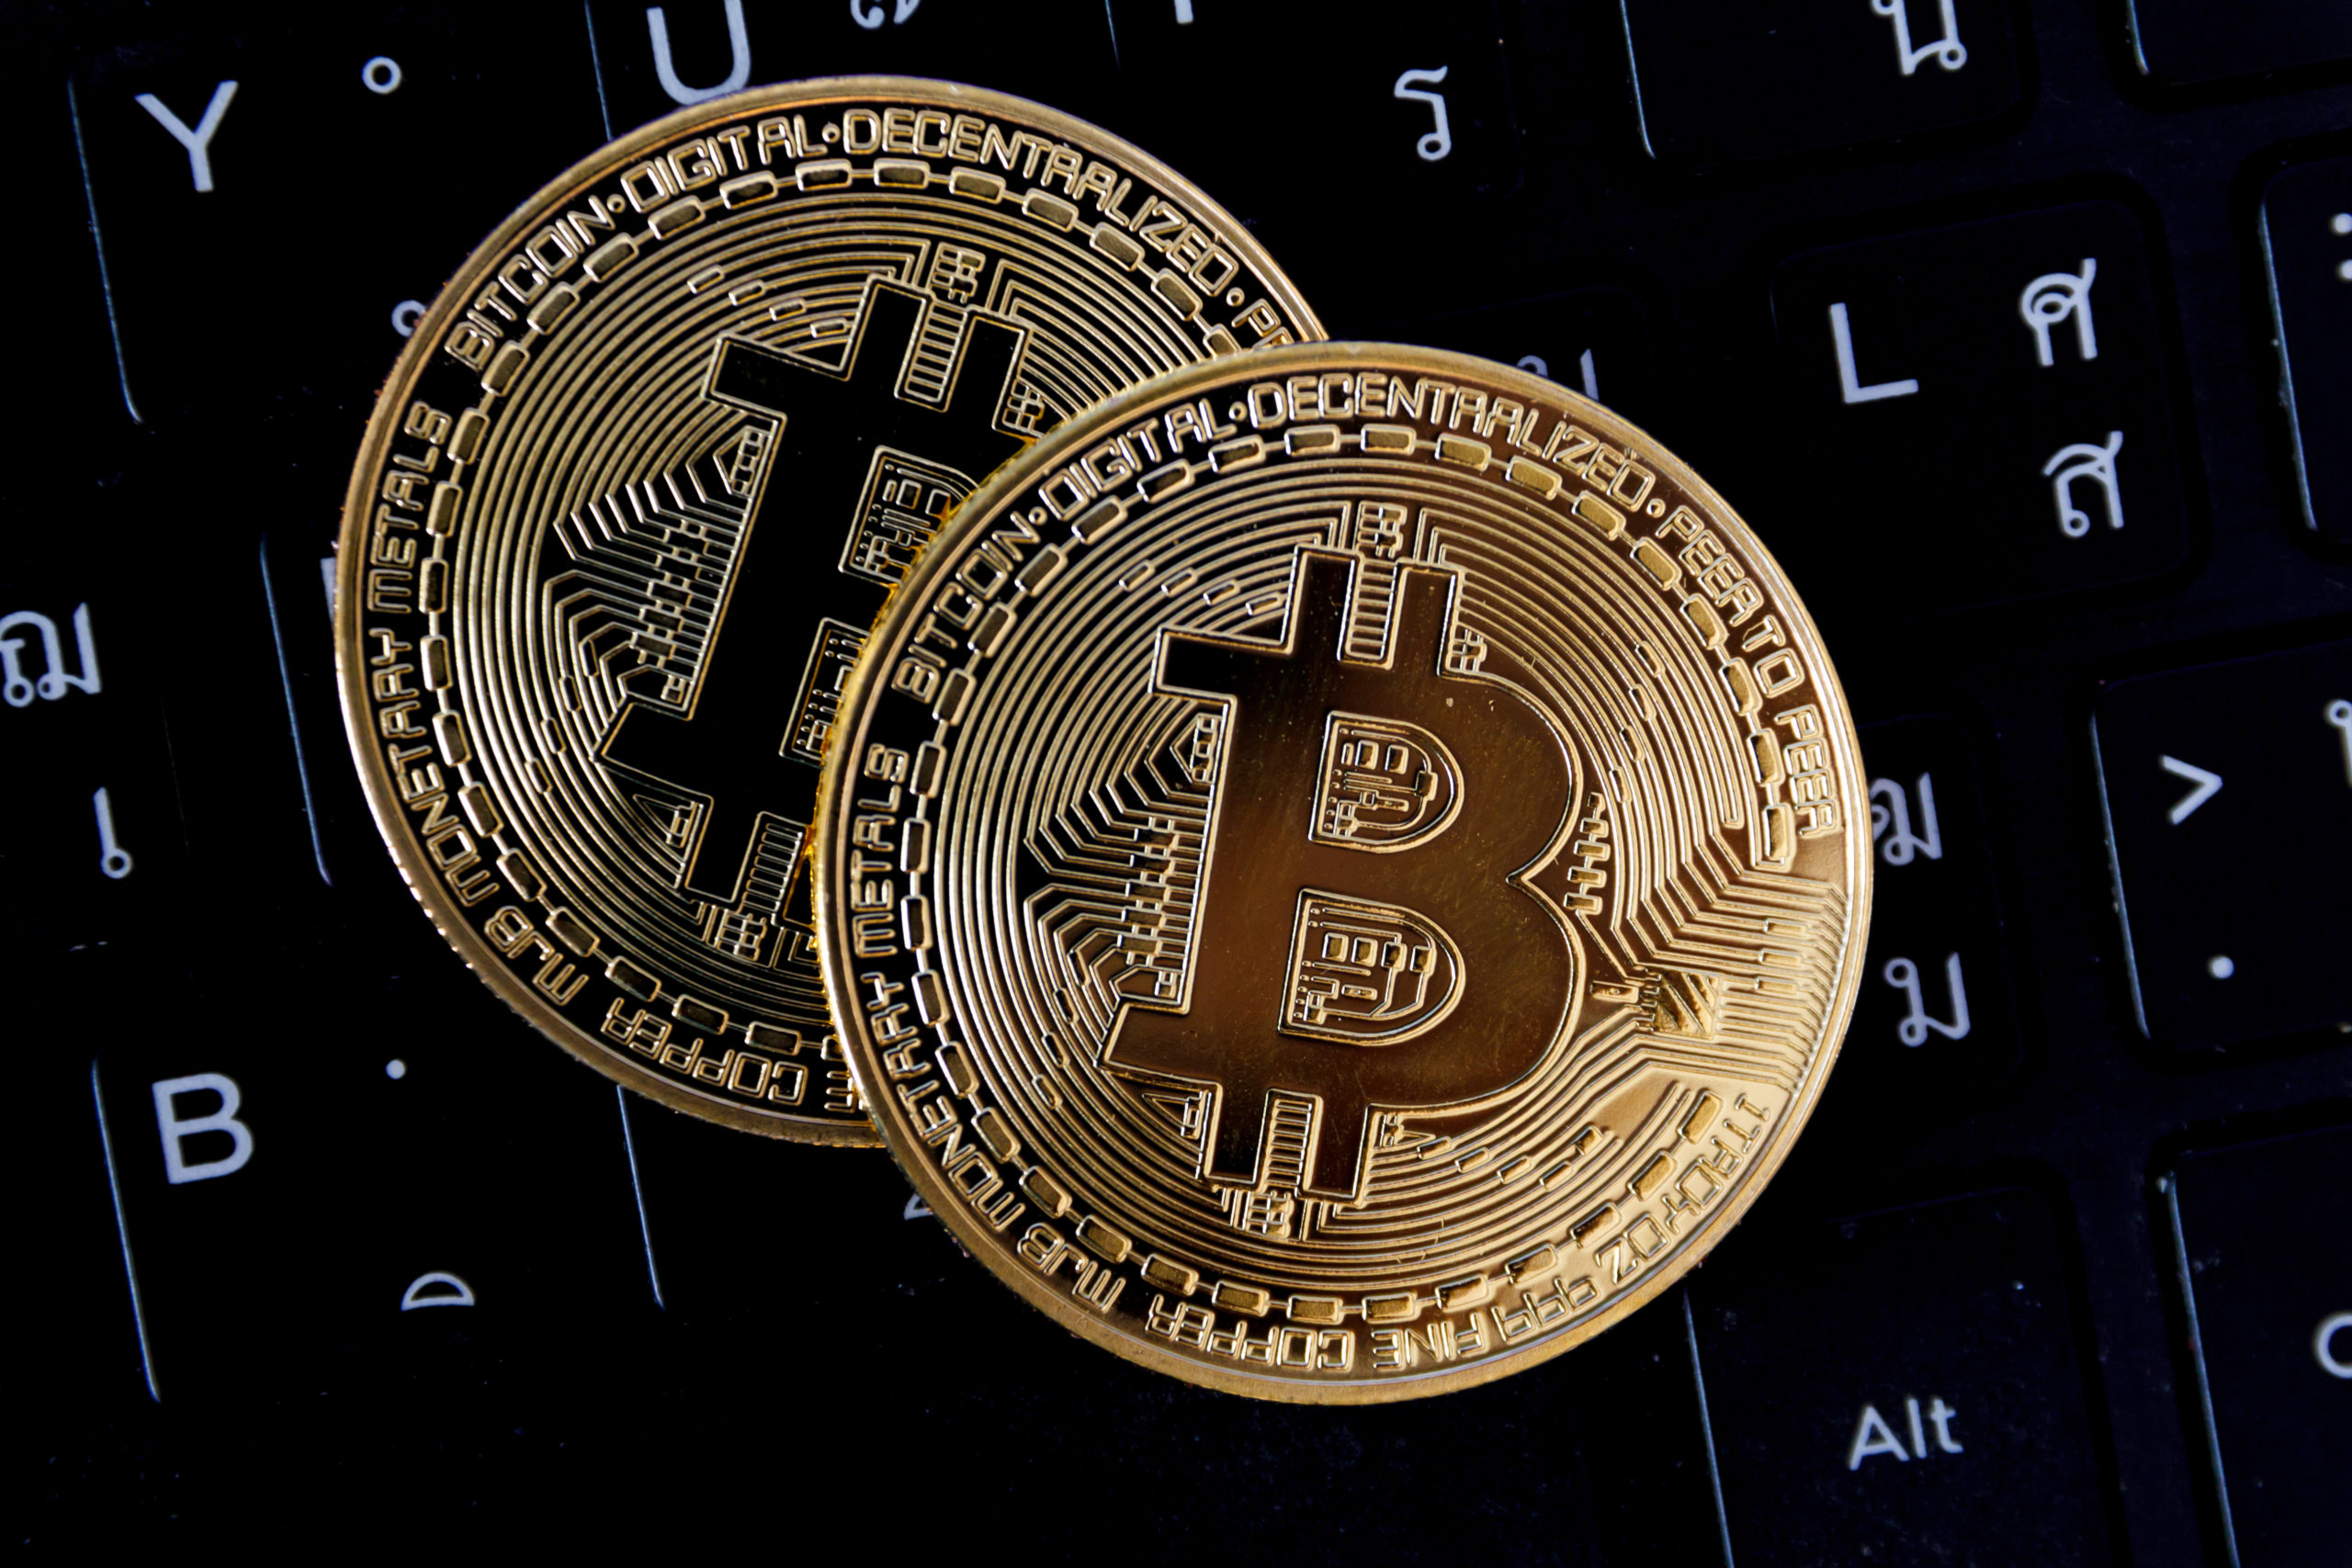 Bitcoin Addresses Holding 1 or More BTC Hits a New All-time High of 841,224